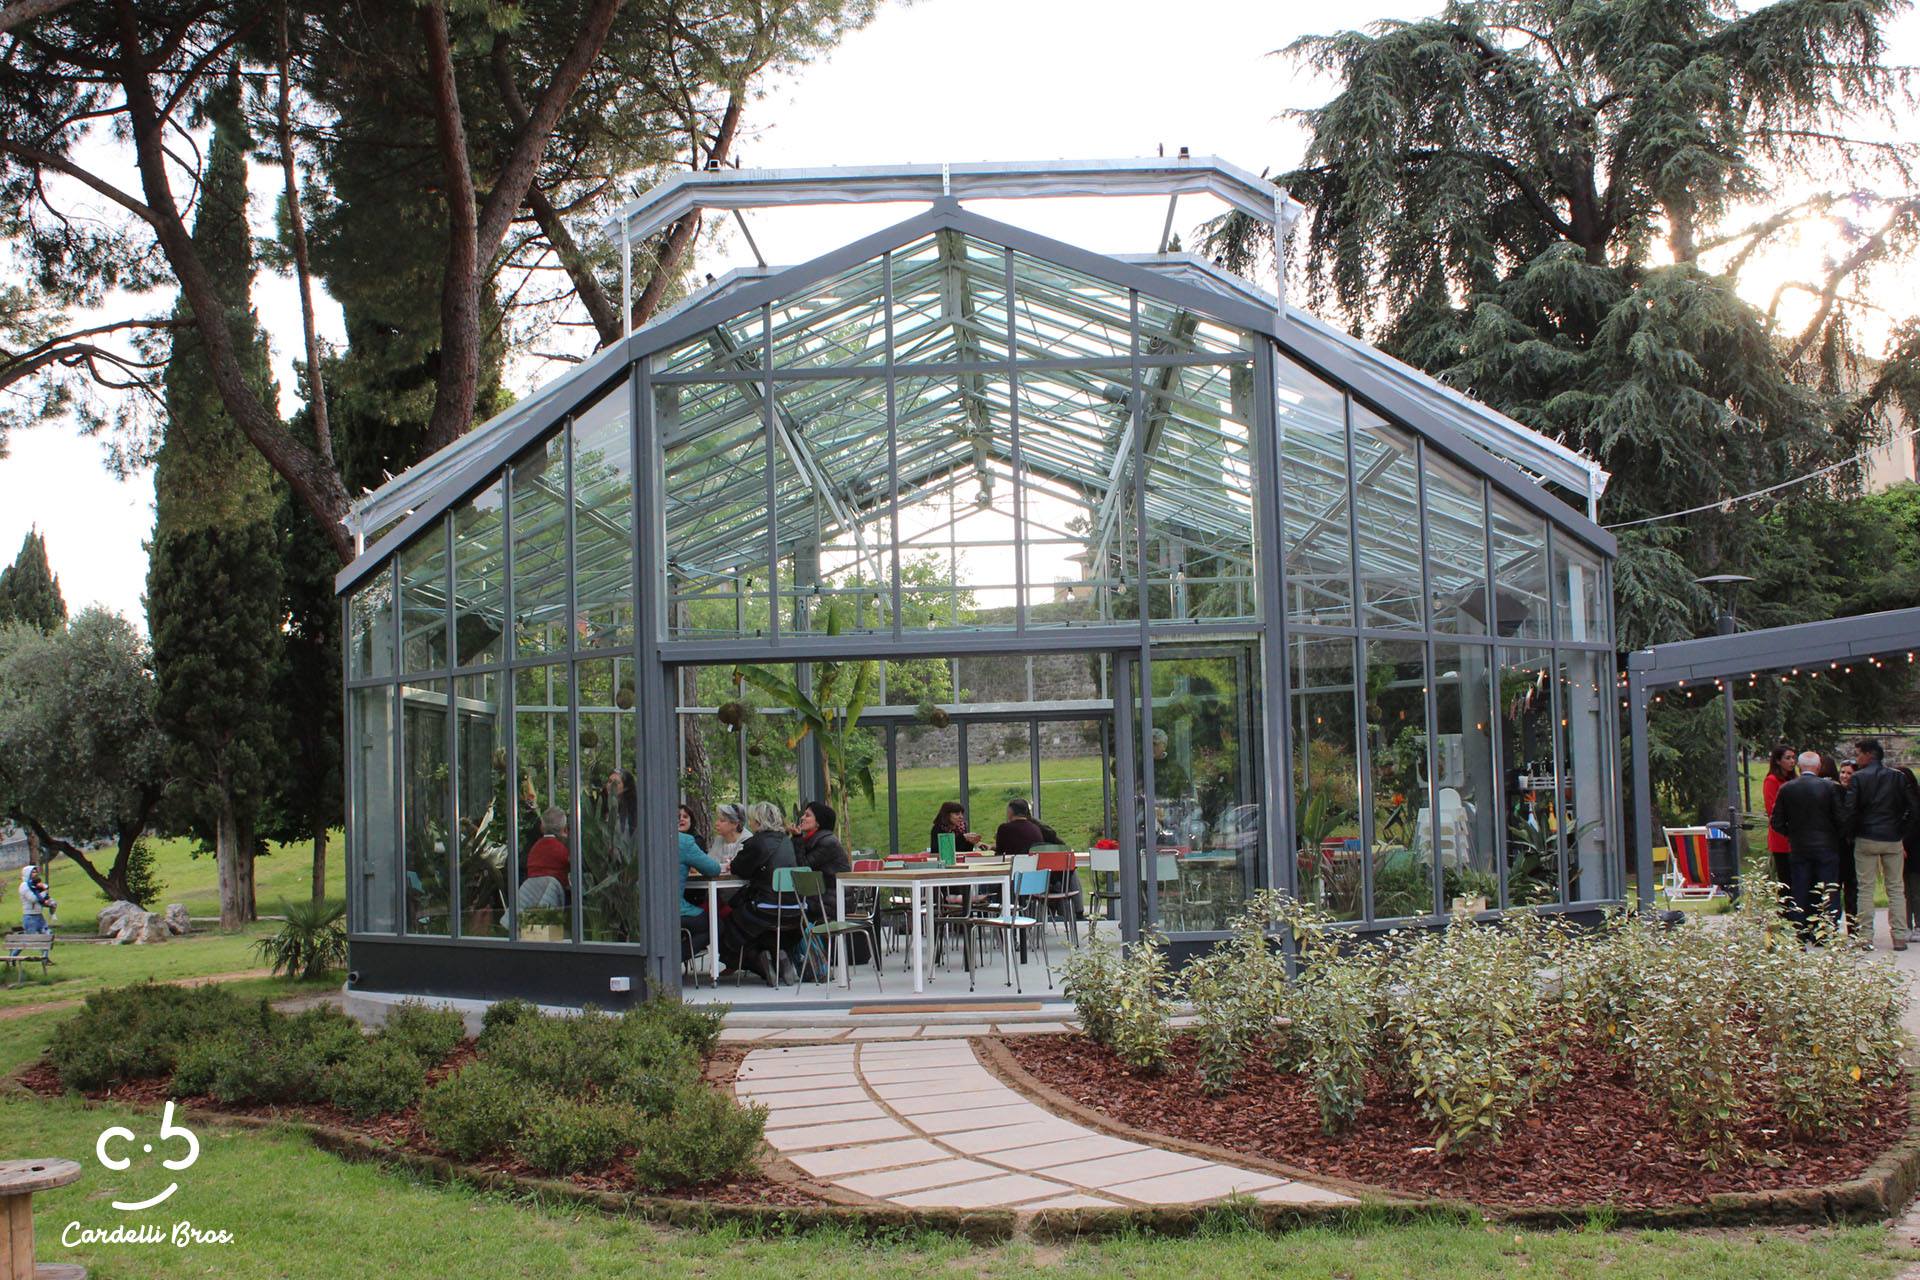 In Pistoia, a new greenhouse bar restaurant in the Monteoliveto park